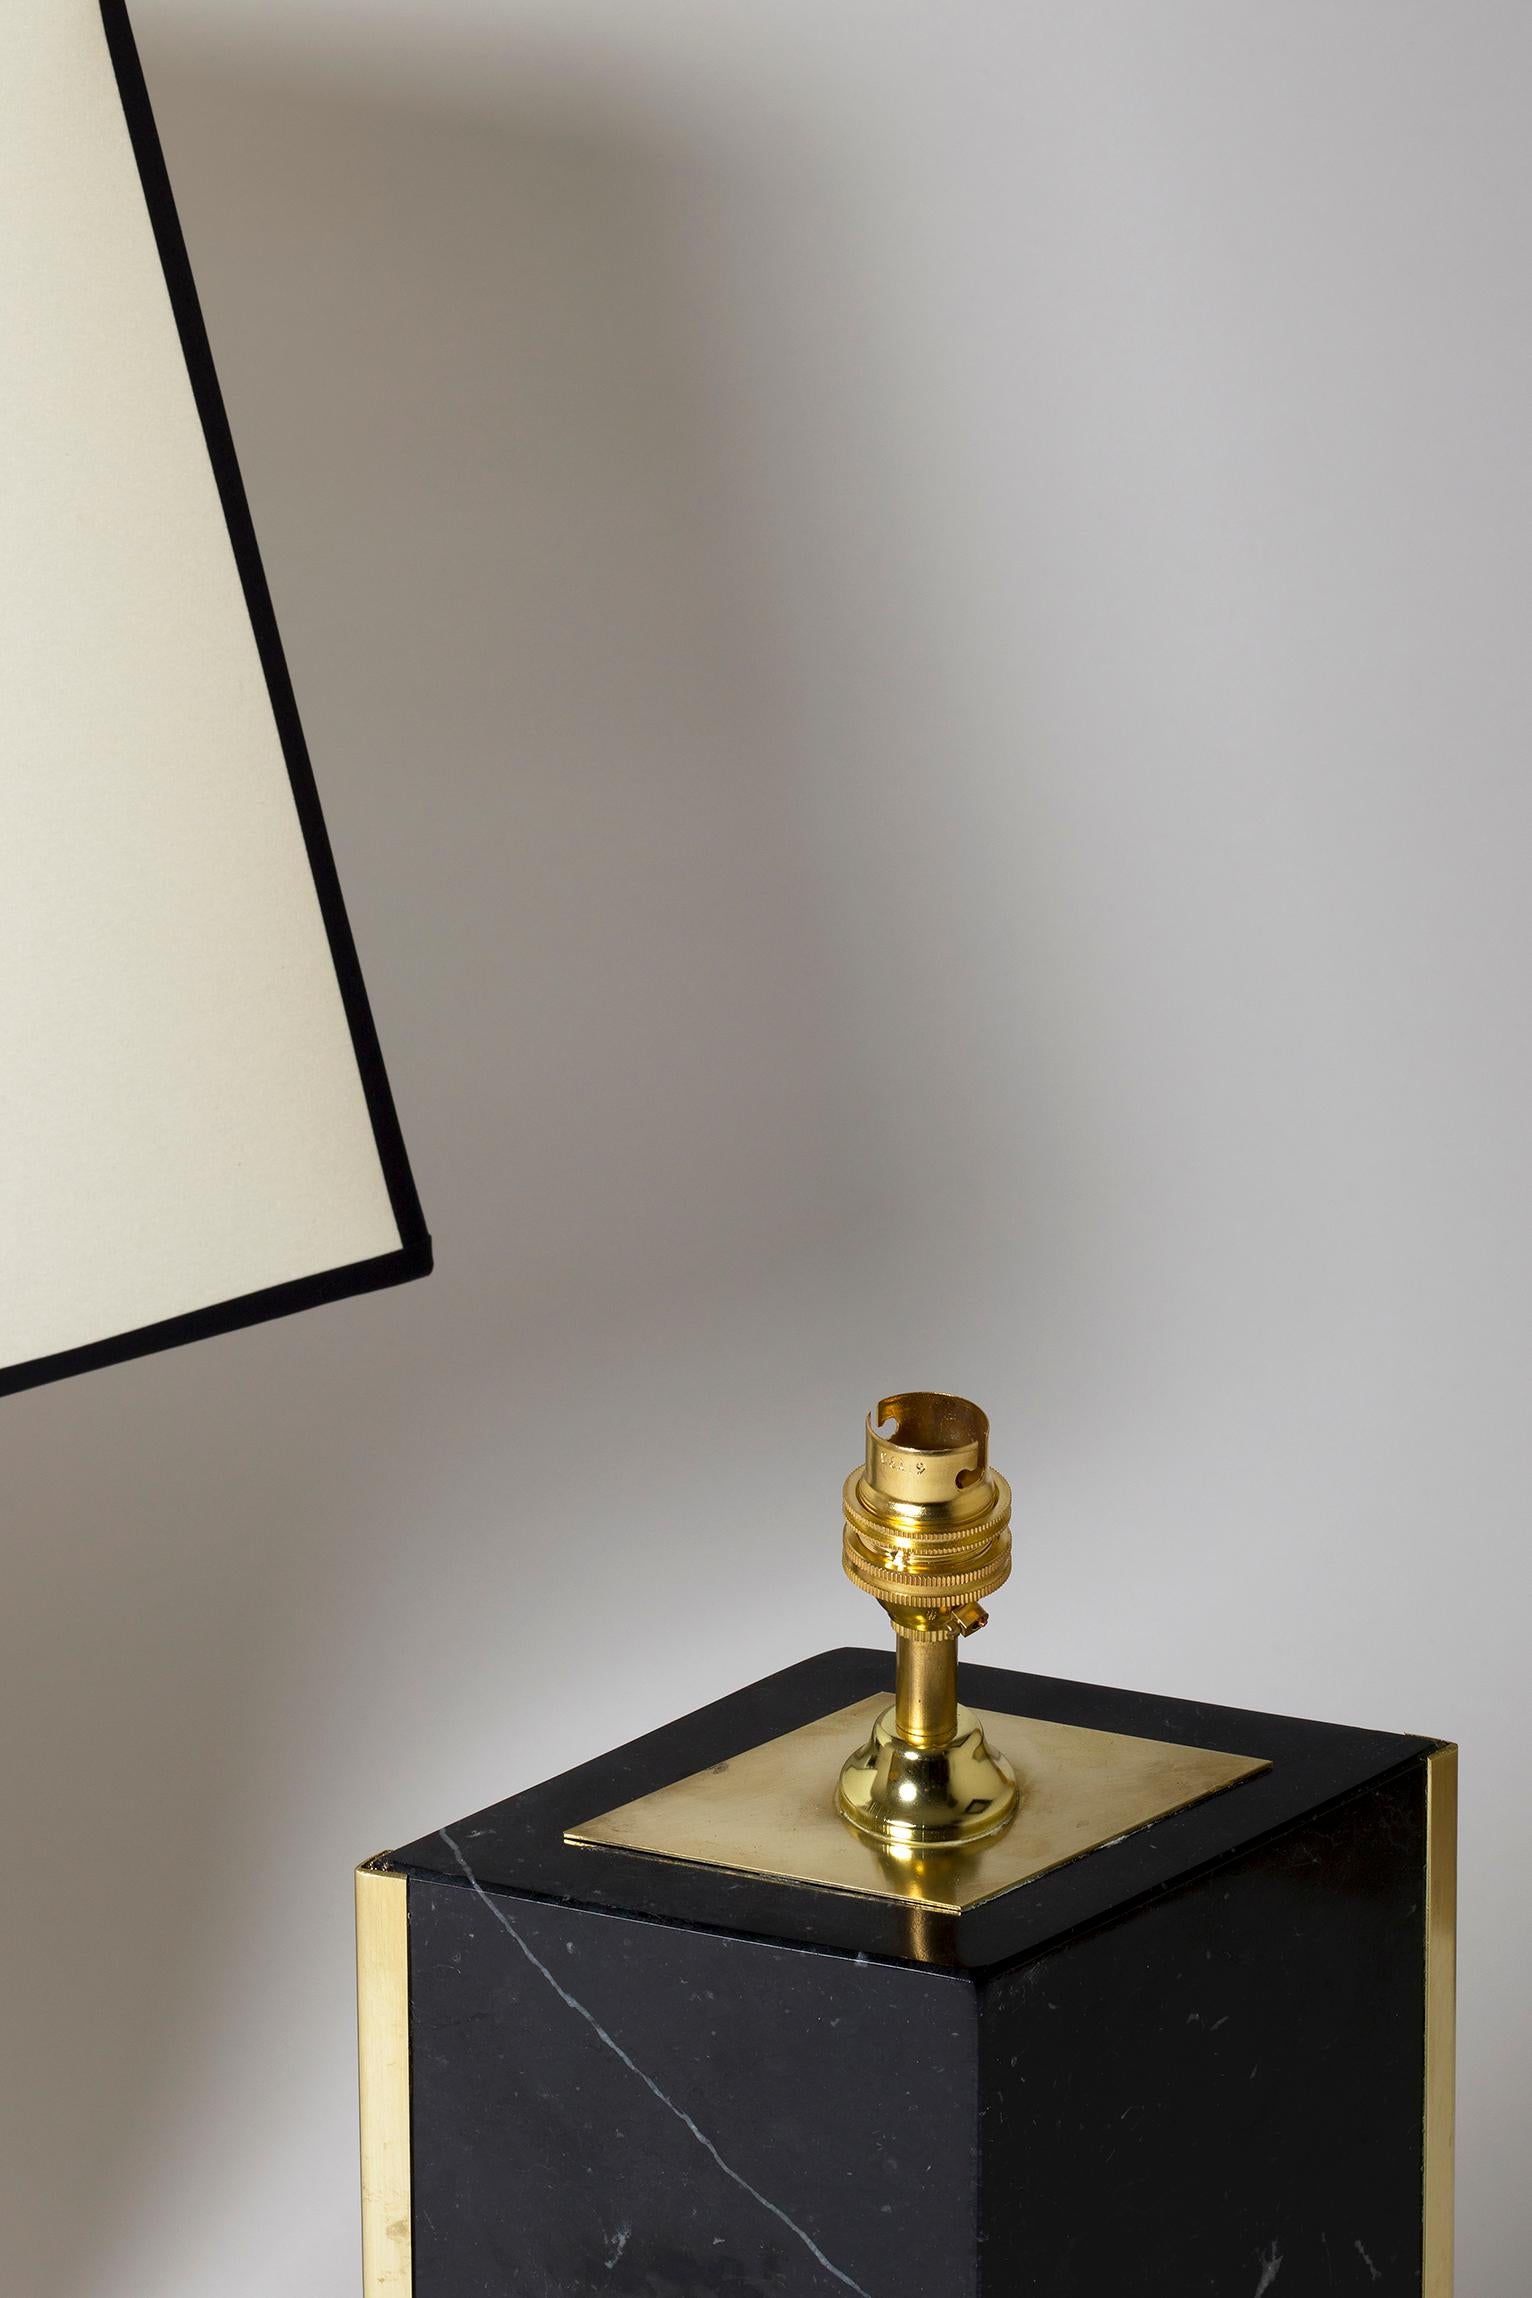 'Marine' Black Marble and Brass Table Lamp, by Dorian Caffot de Fawes 1